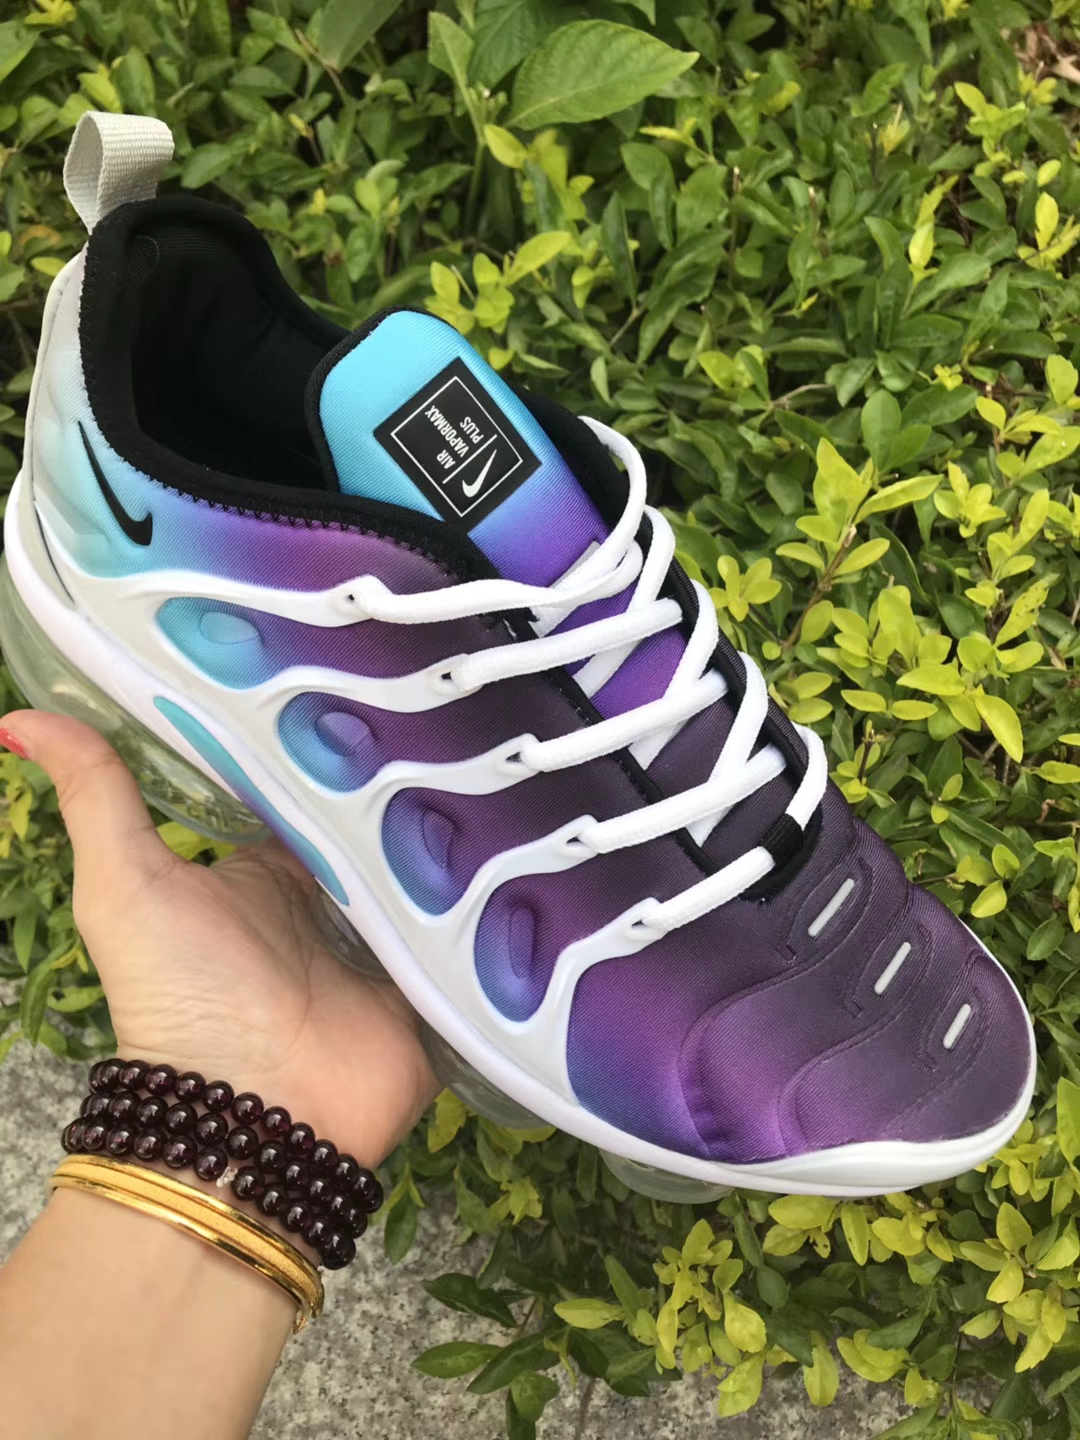 Men's Hot sale Running weapon Air Max TN 2019 Shoes 003